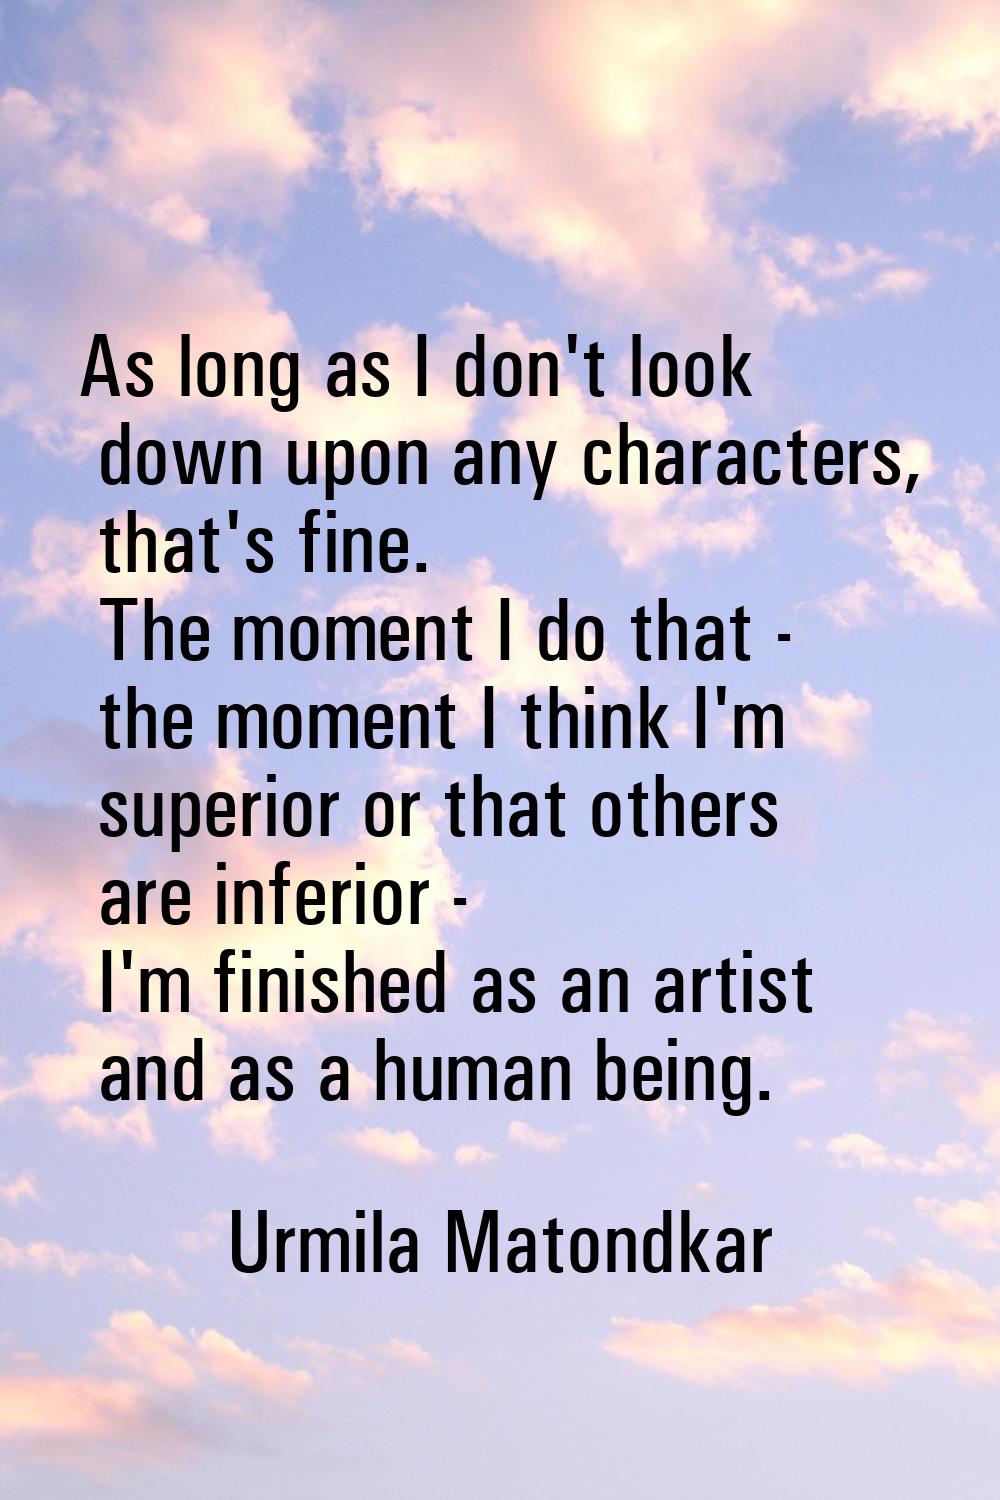 As long as I don't look down upon any characters, that's fine. The moment I do that - the moment I 